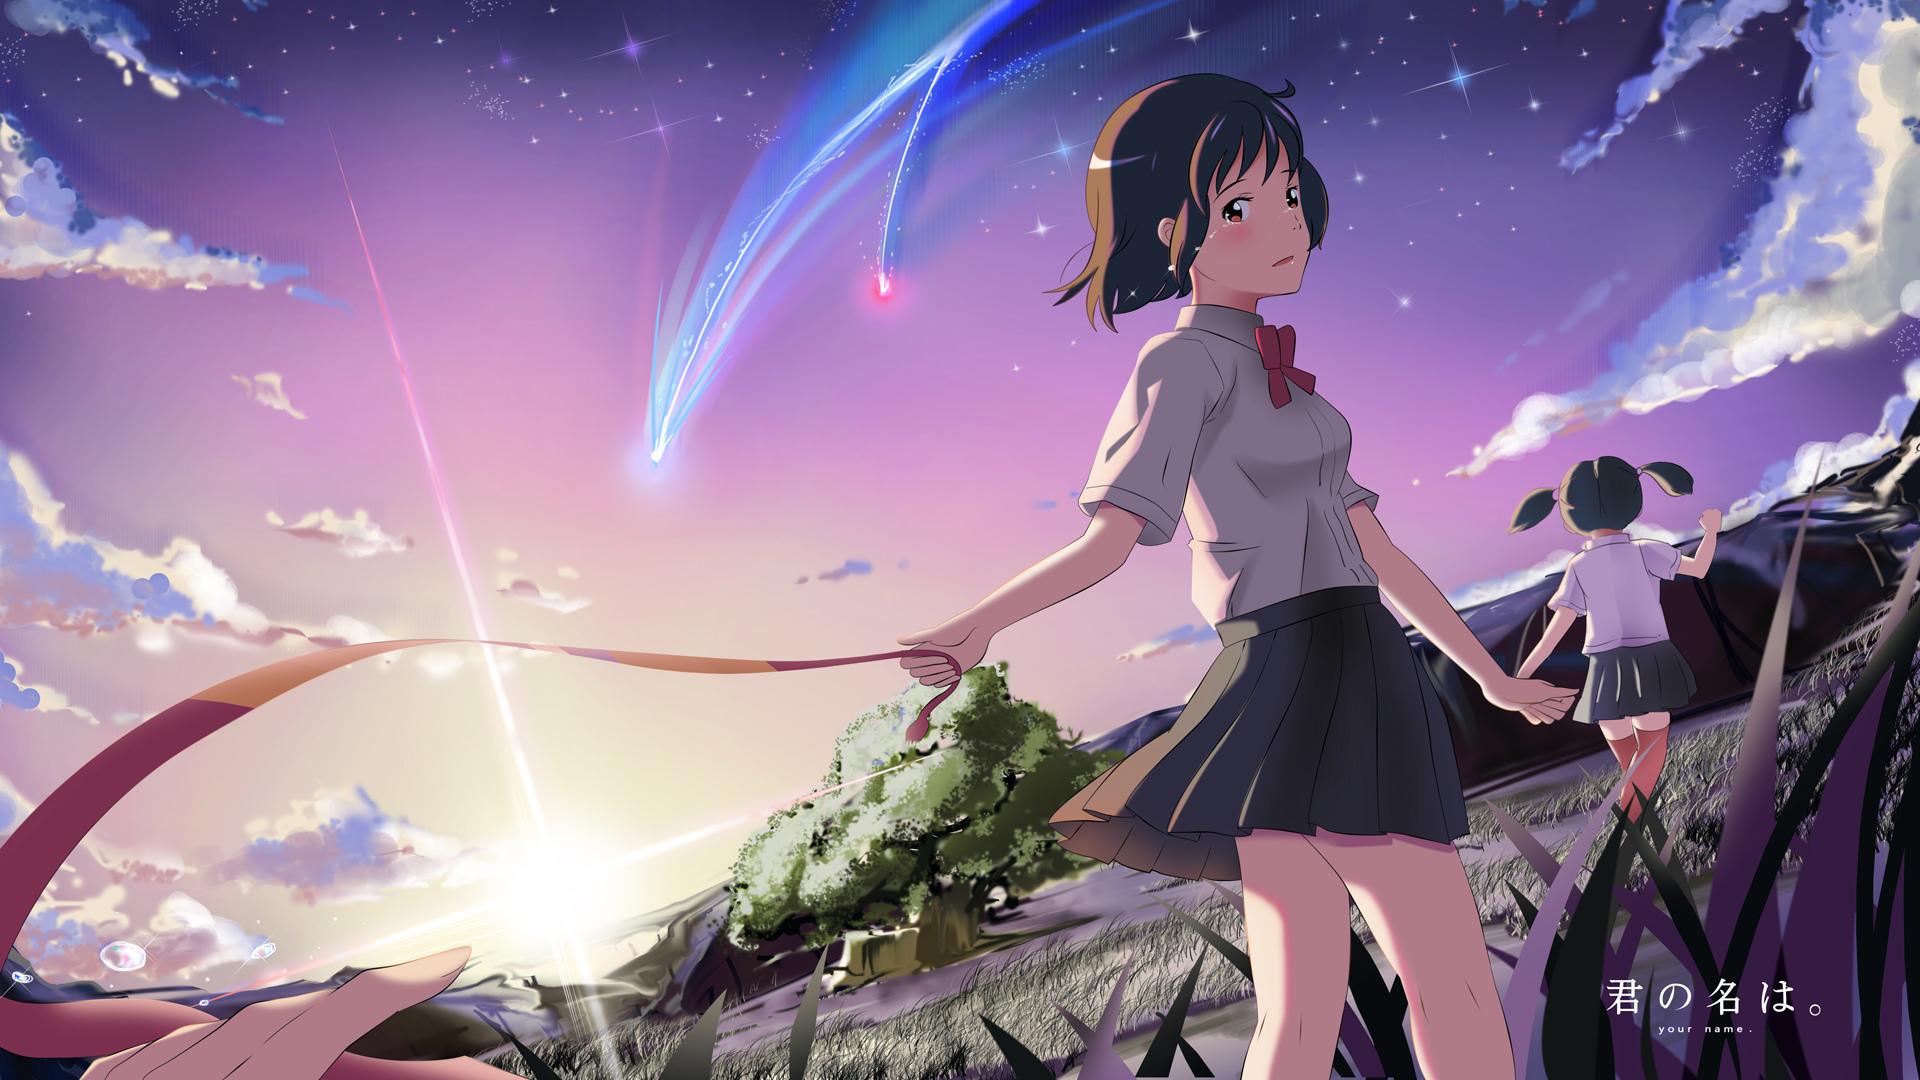 Your Name Anime Wallpapers - Top Free Your Name Anime Backgrounds